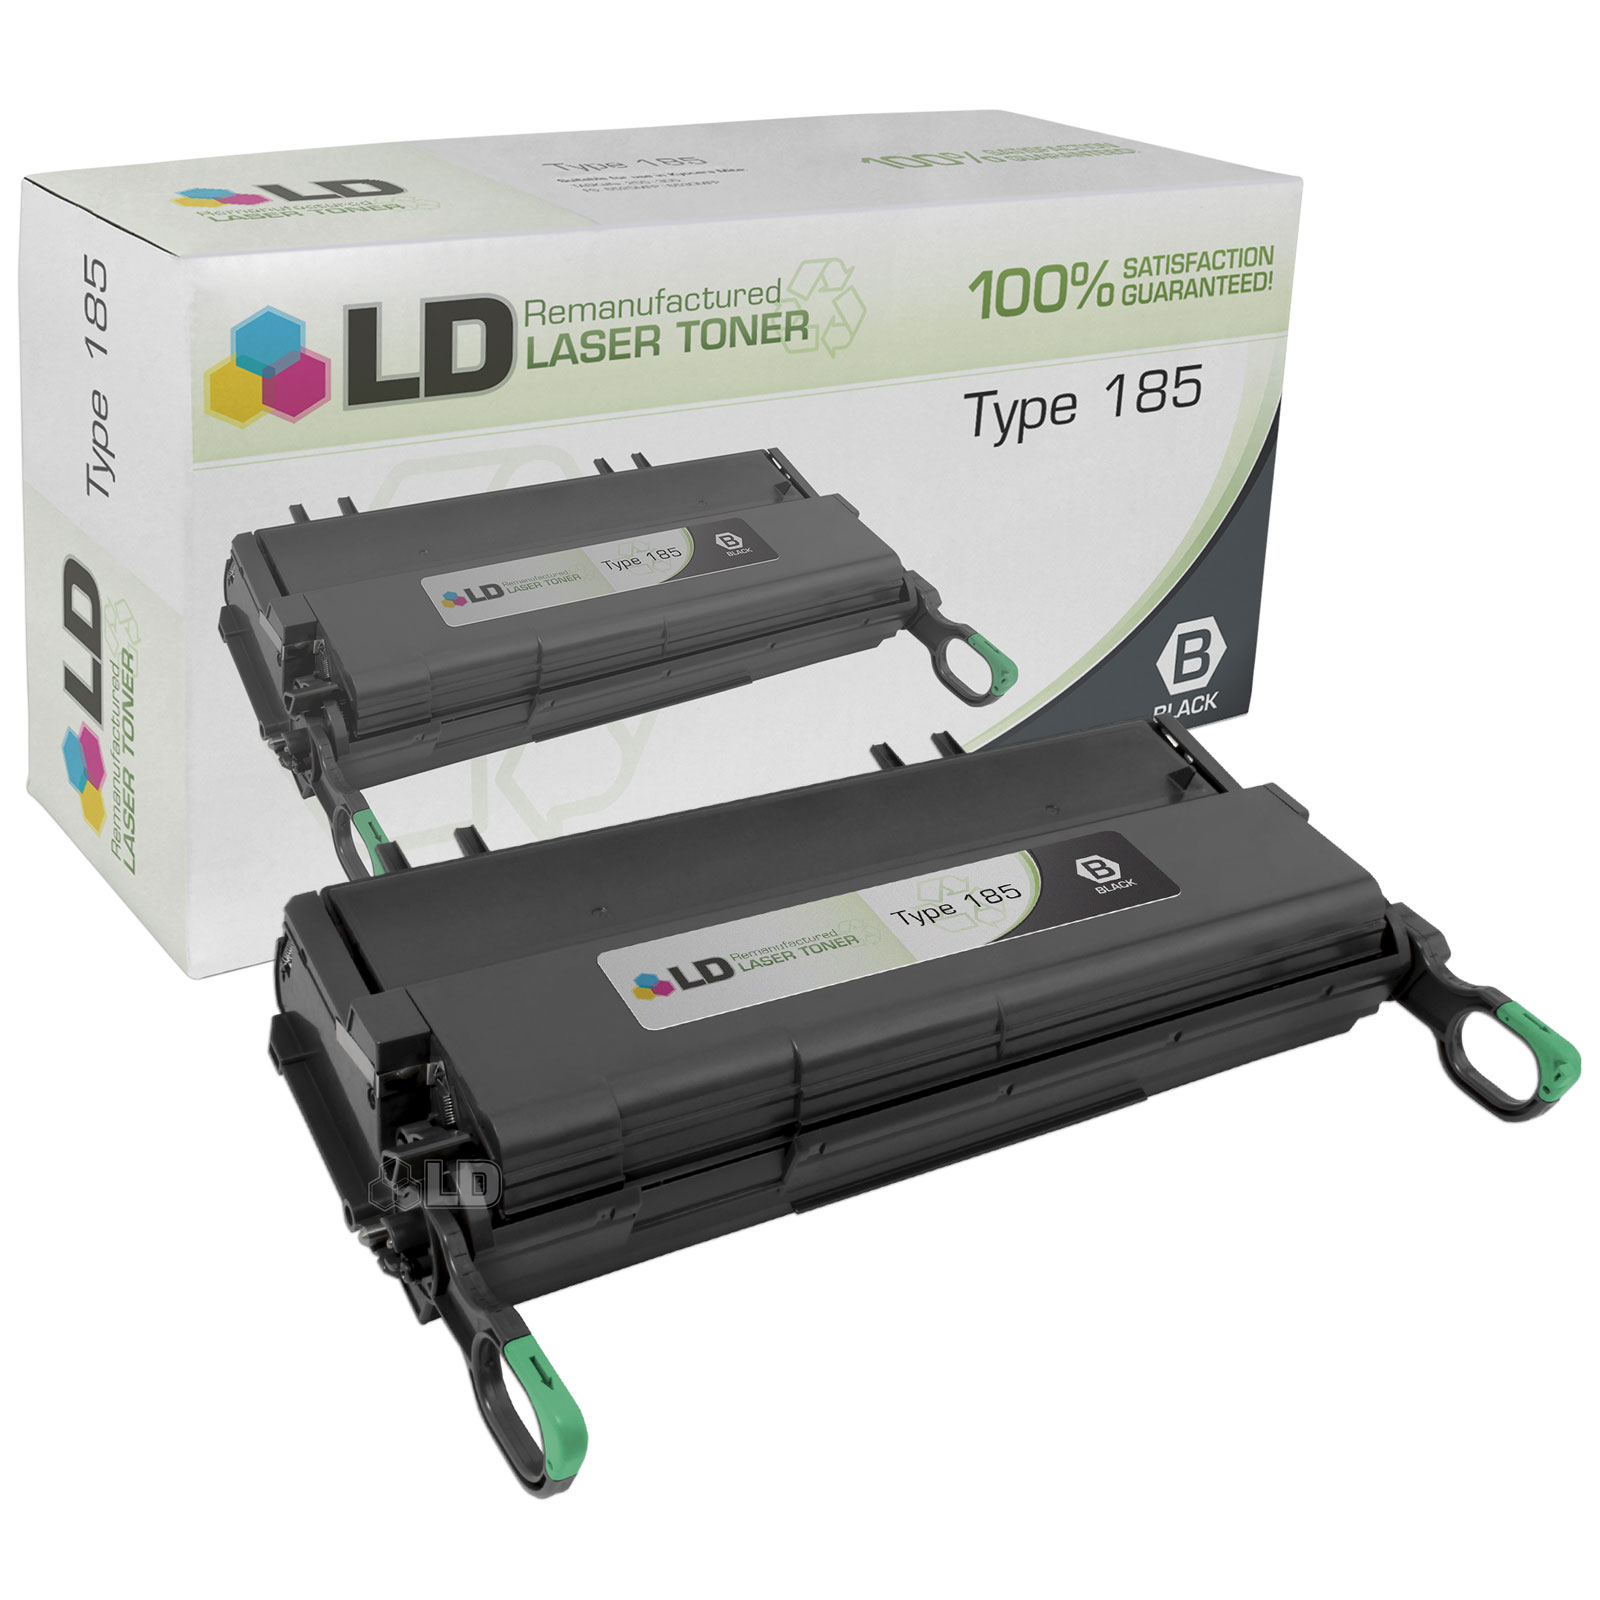 LD Remanufactured Replacement for Ricoh 410594 (Type 185) Black Laser Toner Cartridge for use in Ricoh Aficio 150, 180, and 185 s - image 1 of 1